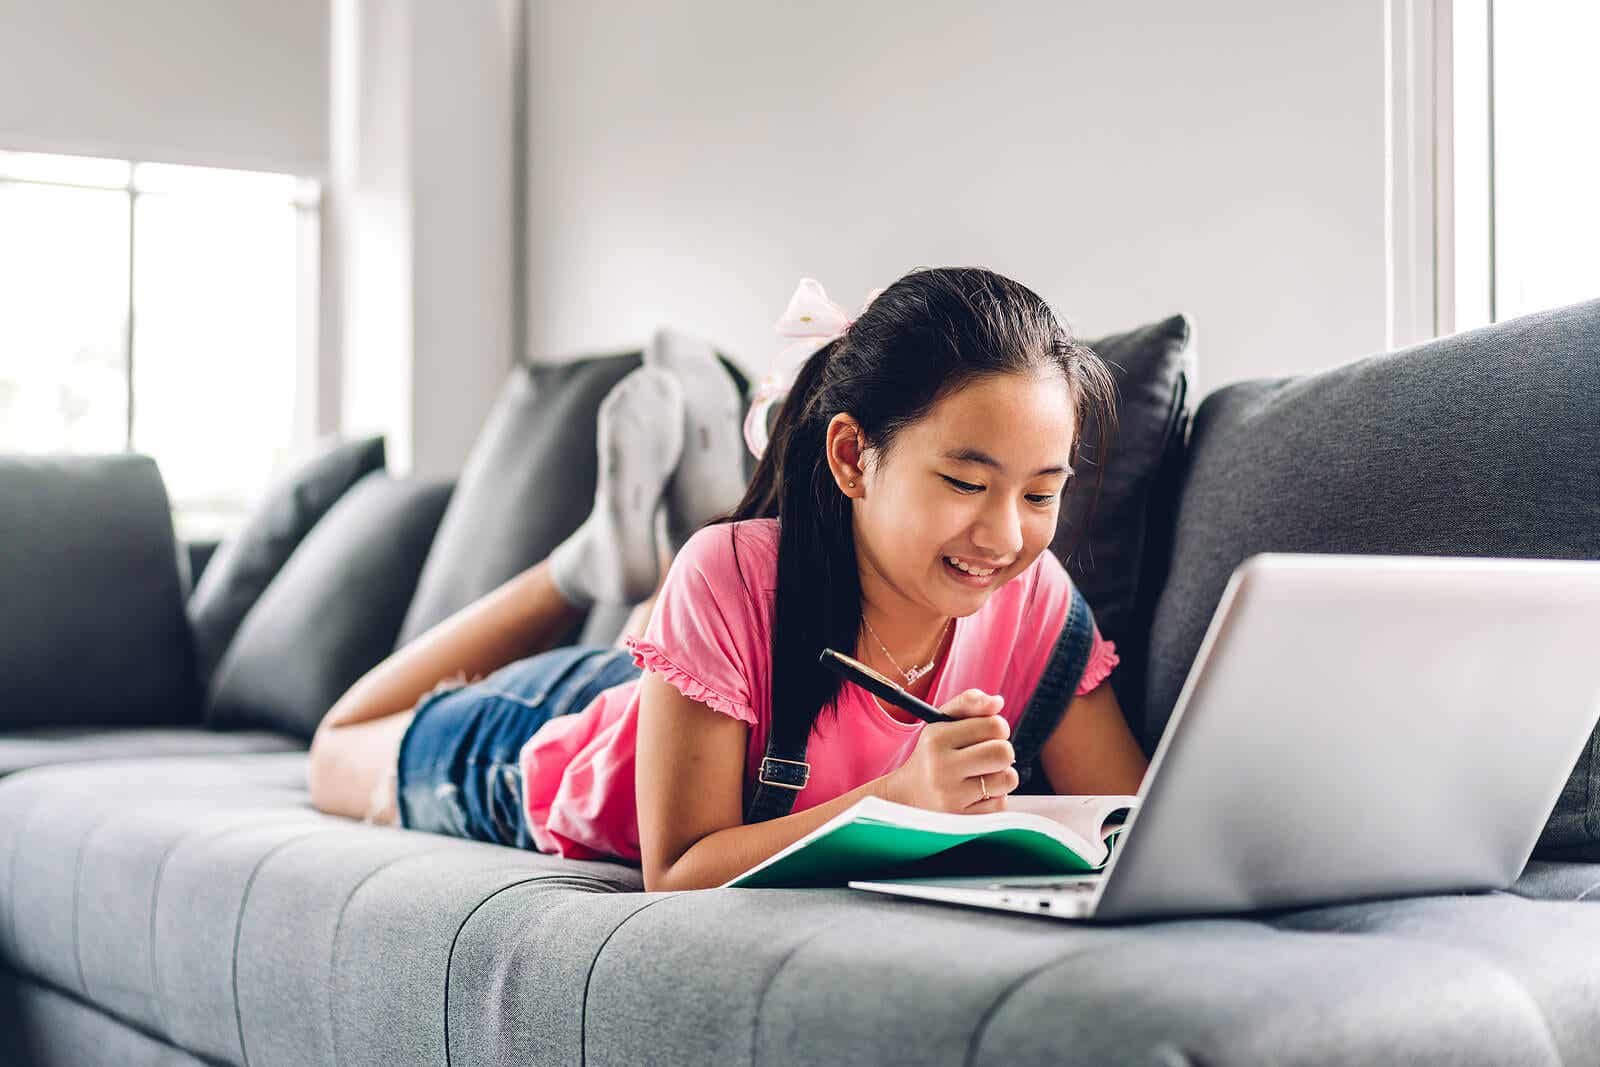 A child lying on a couch doing homework on her laptop computer.